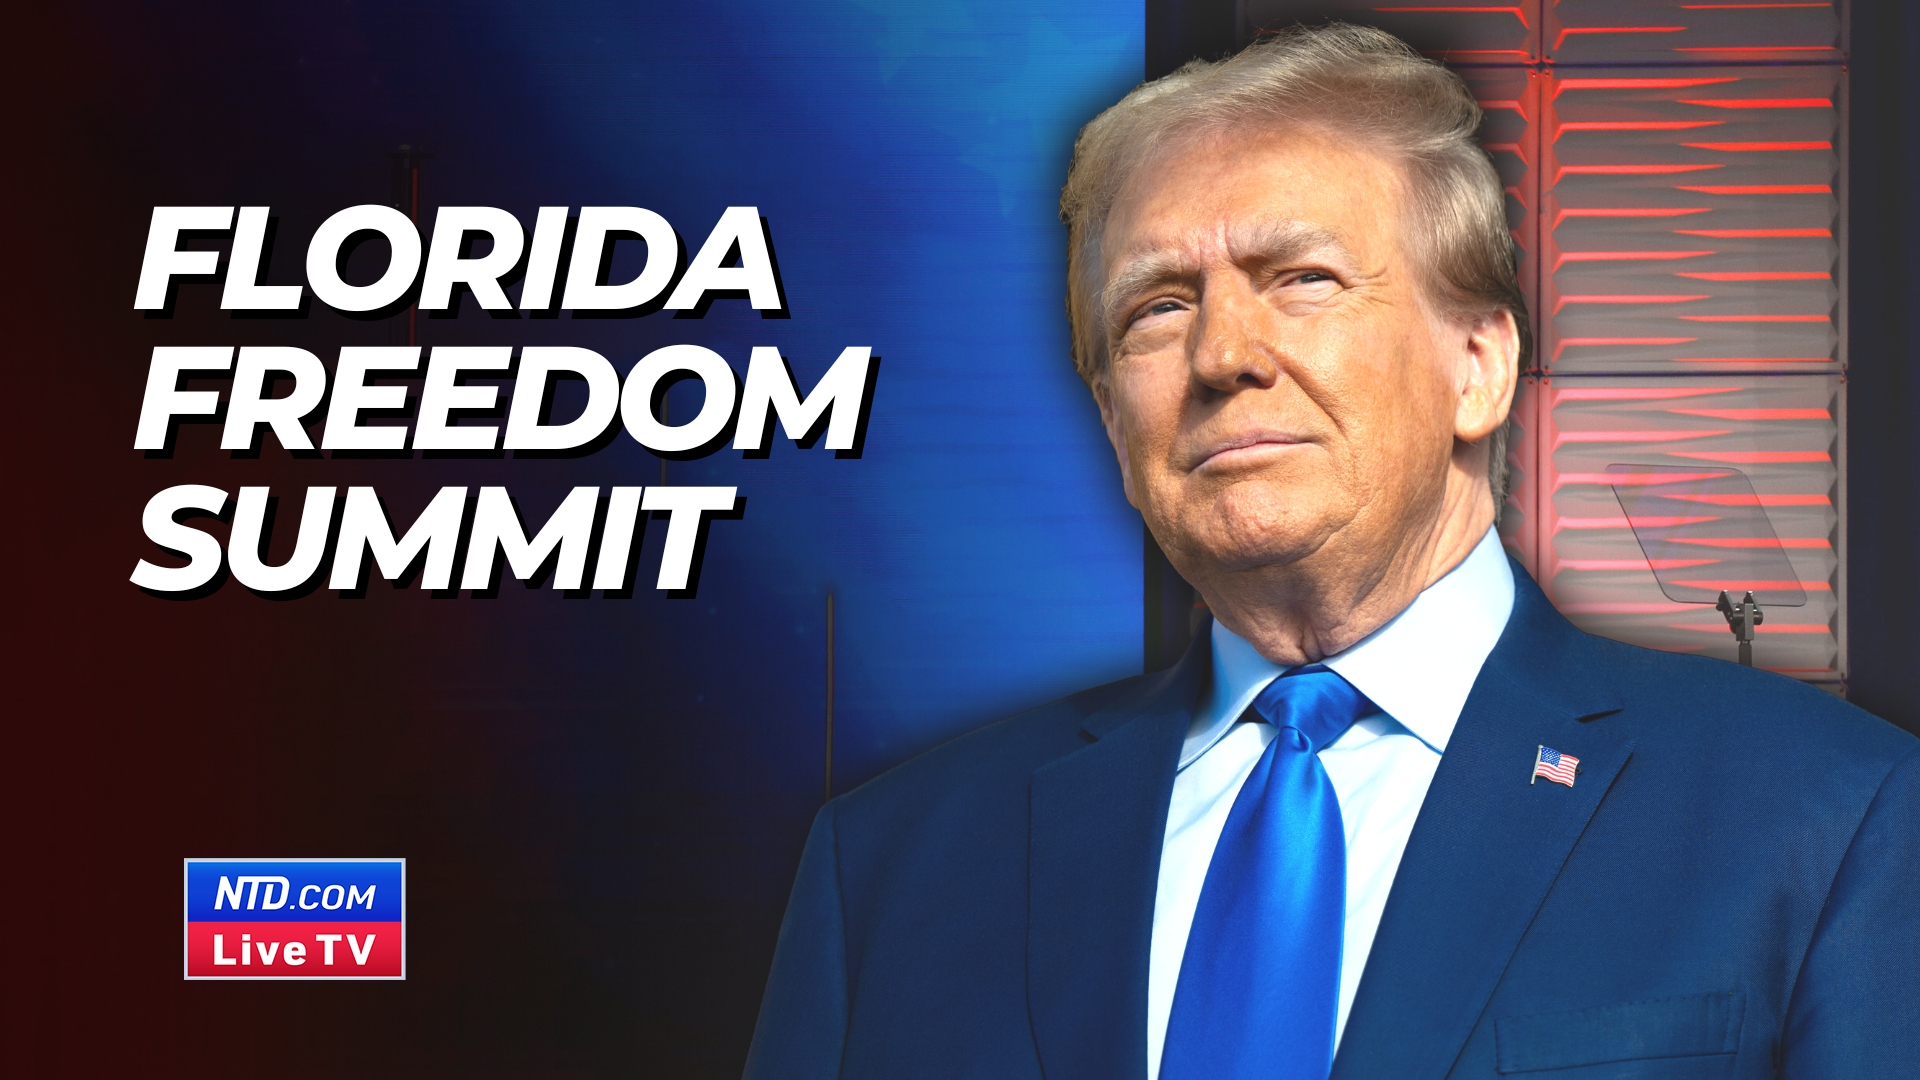 LIVE: Florida GOP Freedom Summit with Trump, DeSantis, and more (Part 2) at 2:35 PM ET.